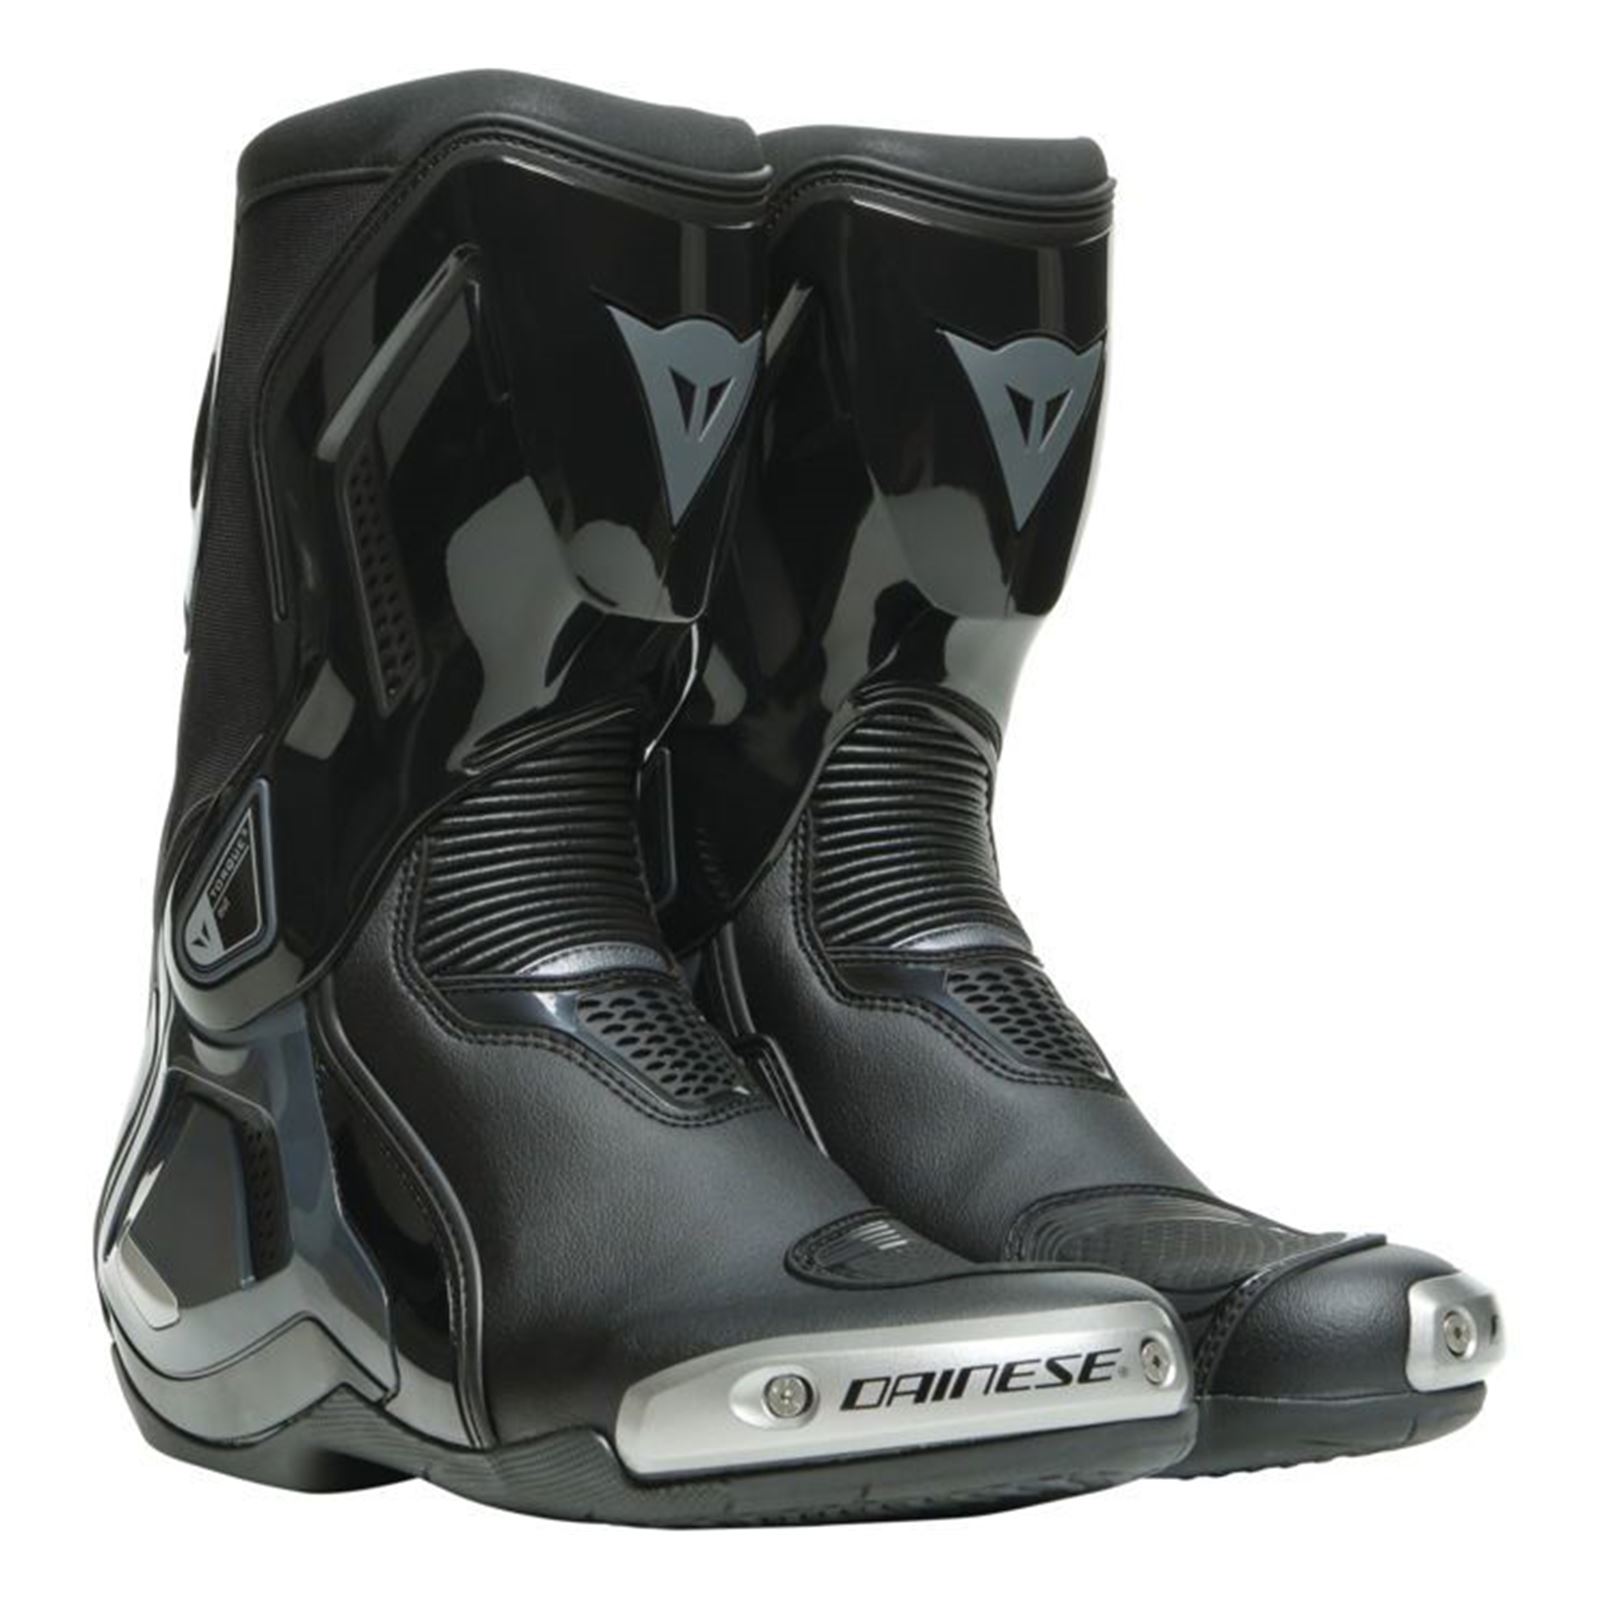 Dainese Men's Torque 3 Out Boots - Size 7 - Black/Grey